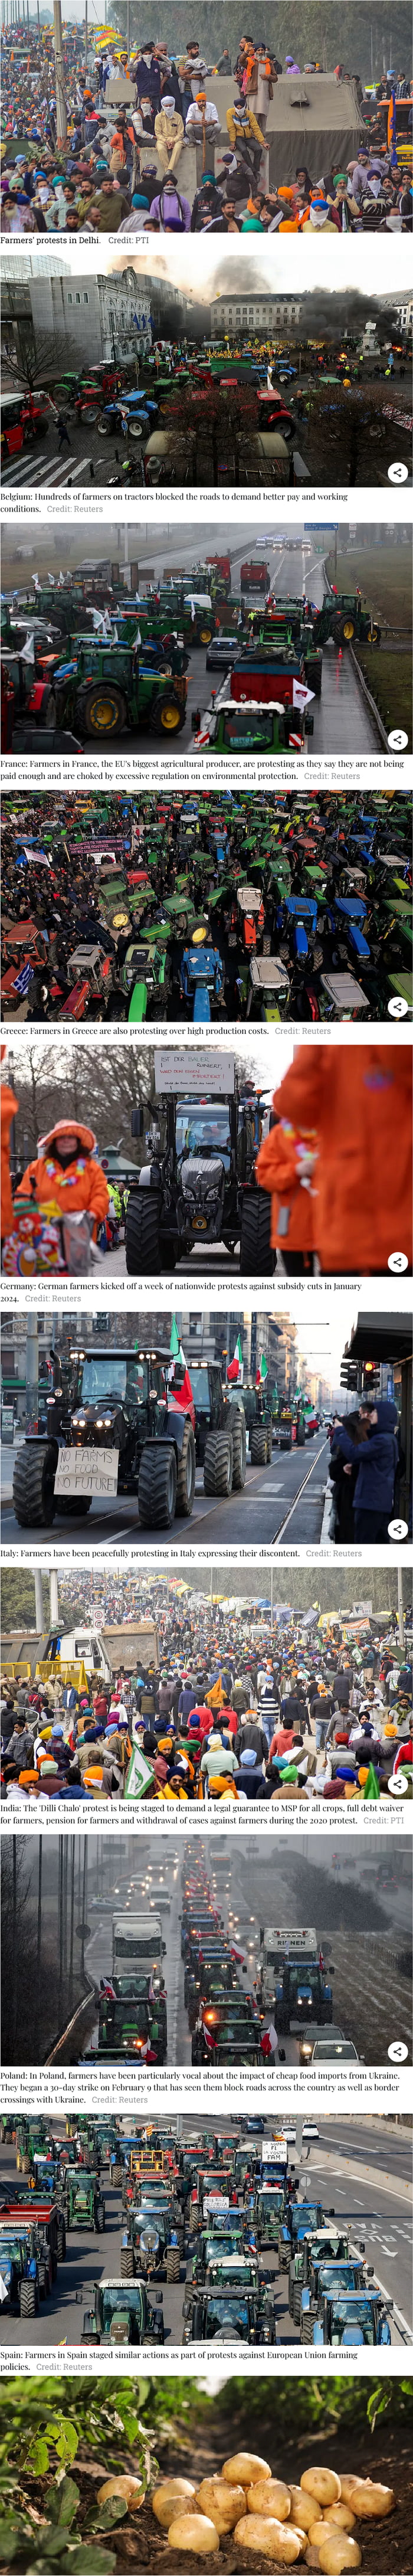 Unprecedented huge farmer's protests all across Europe and I